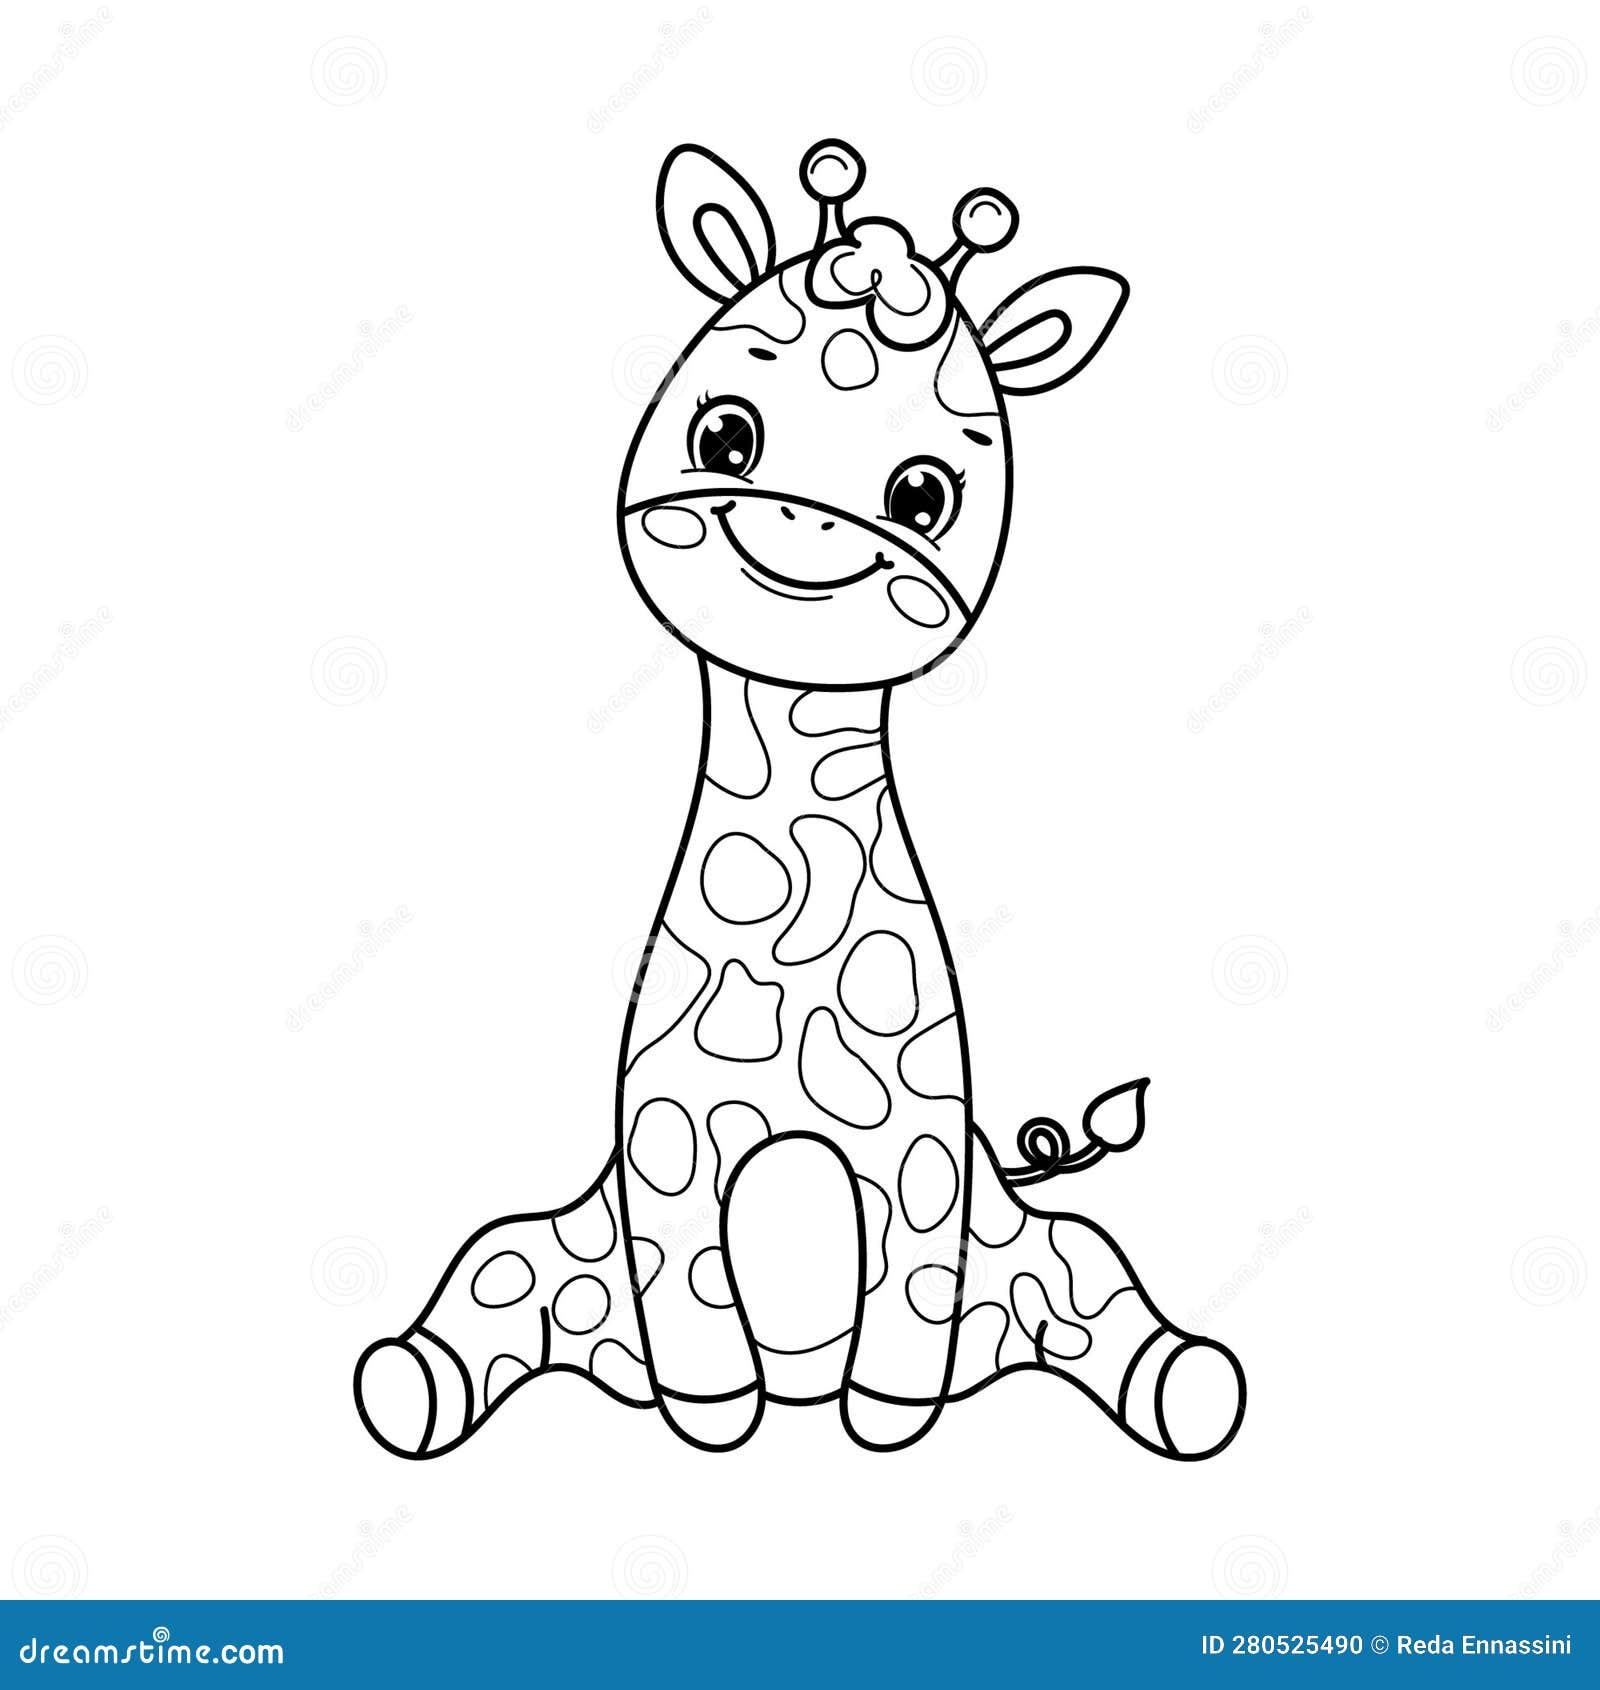 Giraffe coloring page for kids stock vector